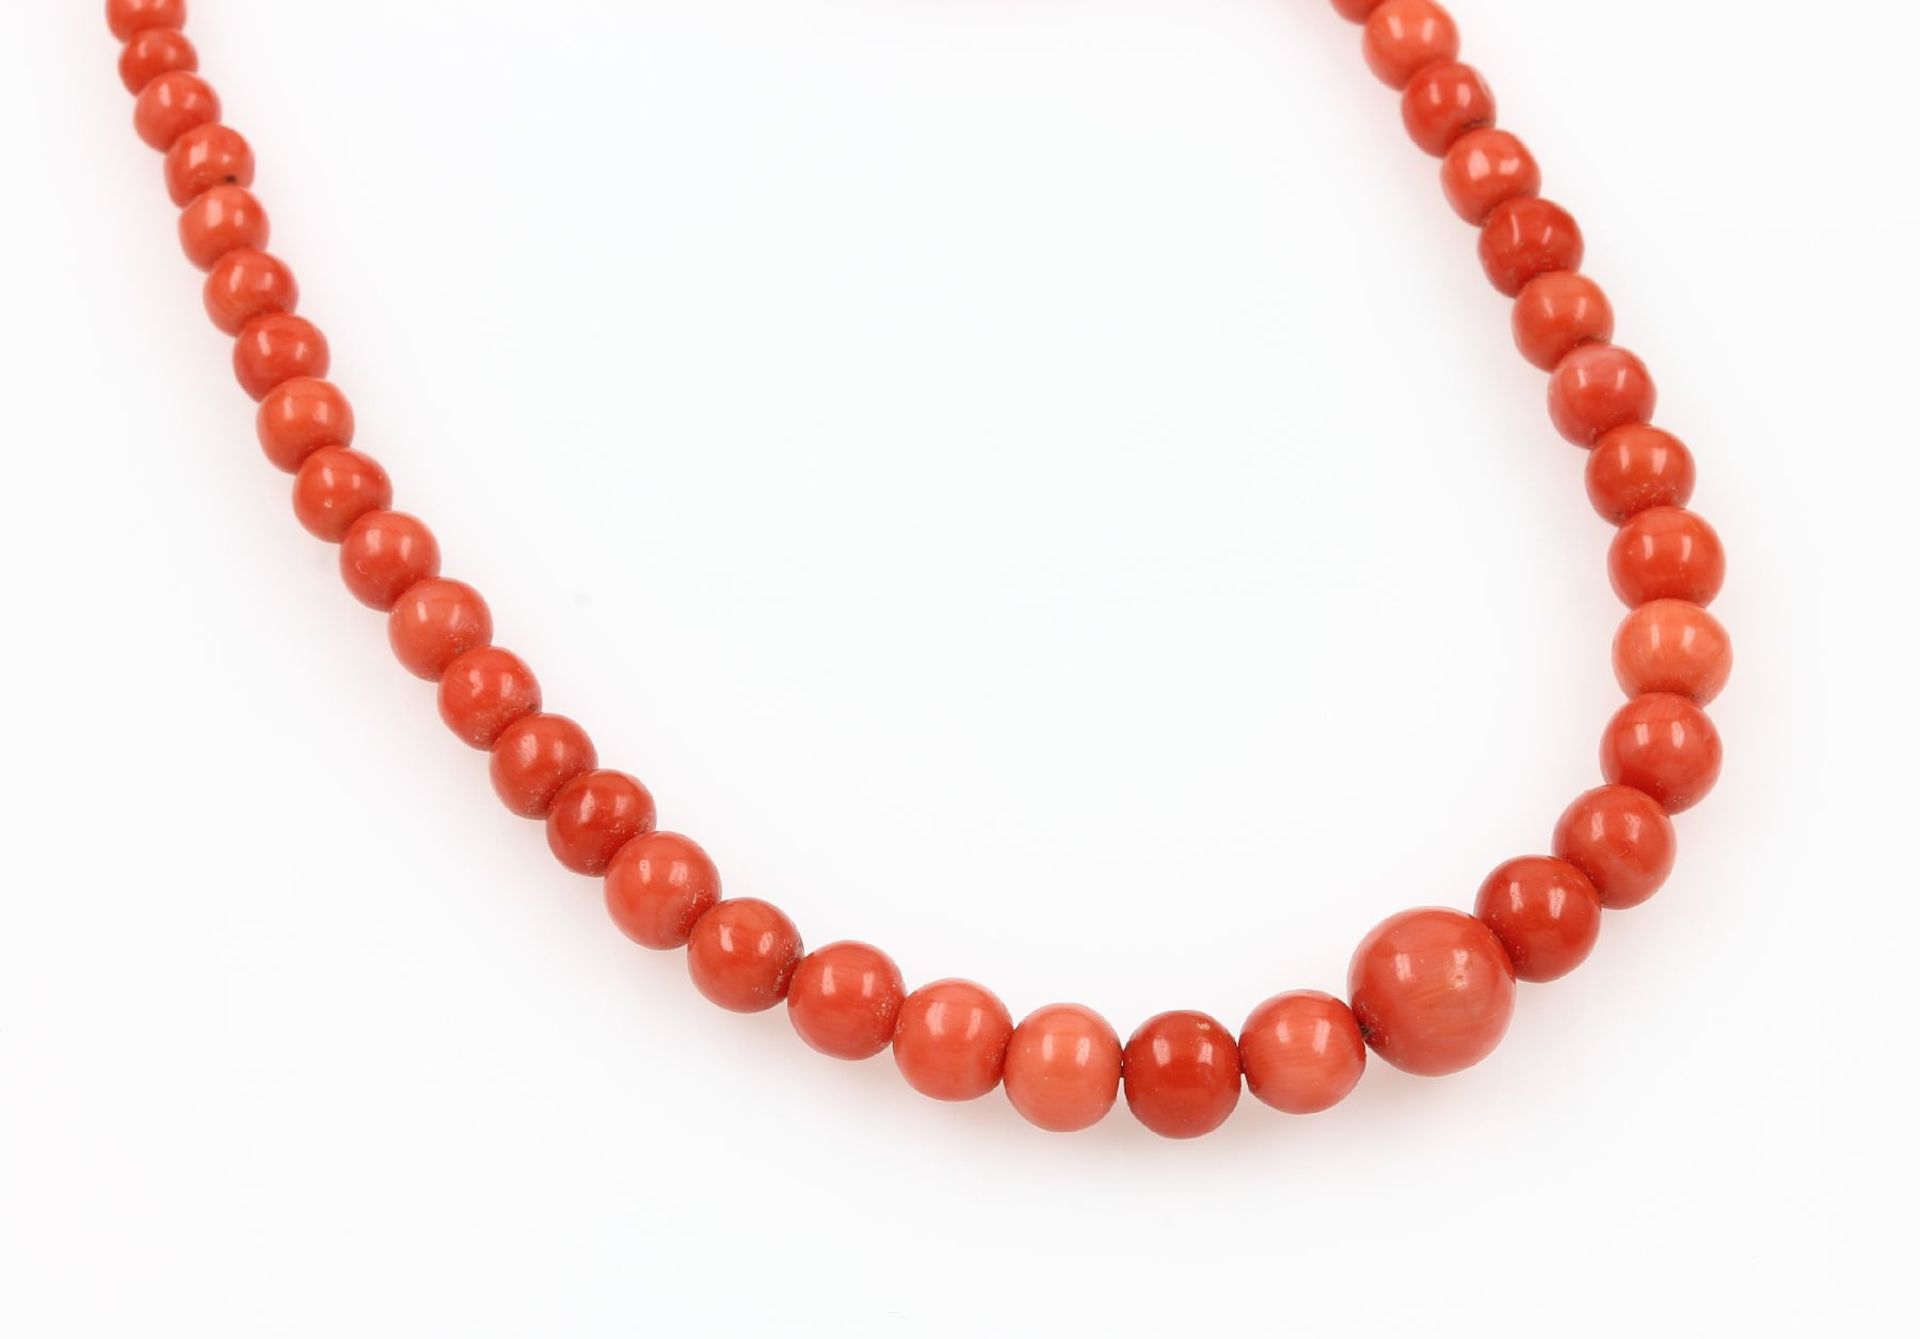 Necklace made of coral, Italy approx. 1890s , coral spheres tapering, diam. approx. 4.5 - 9.5 mm ,